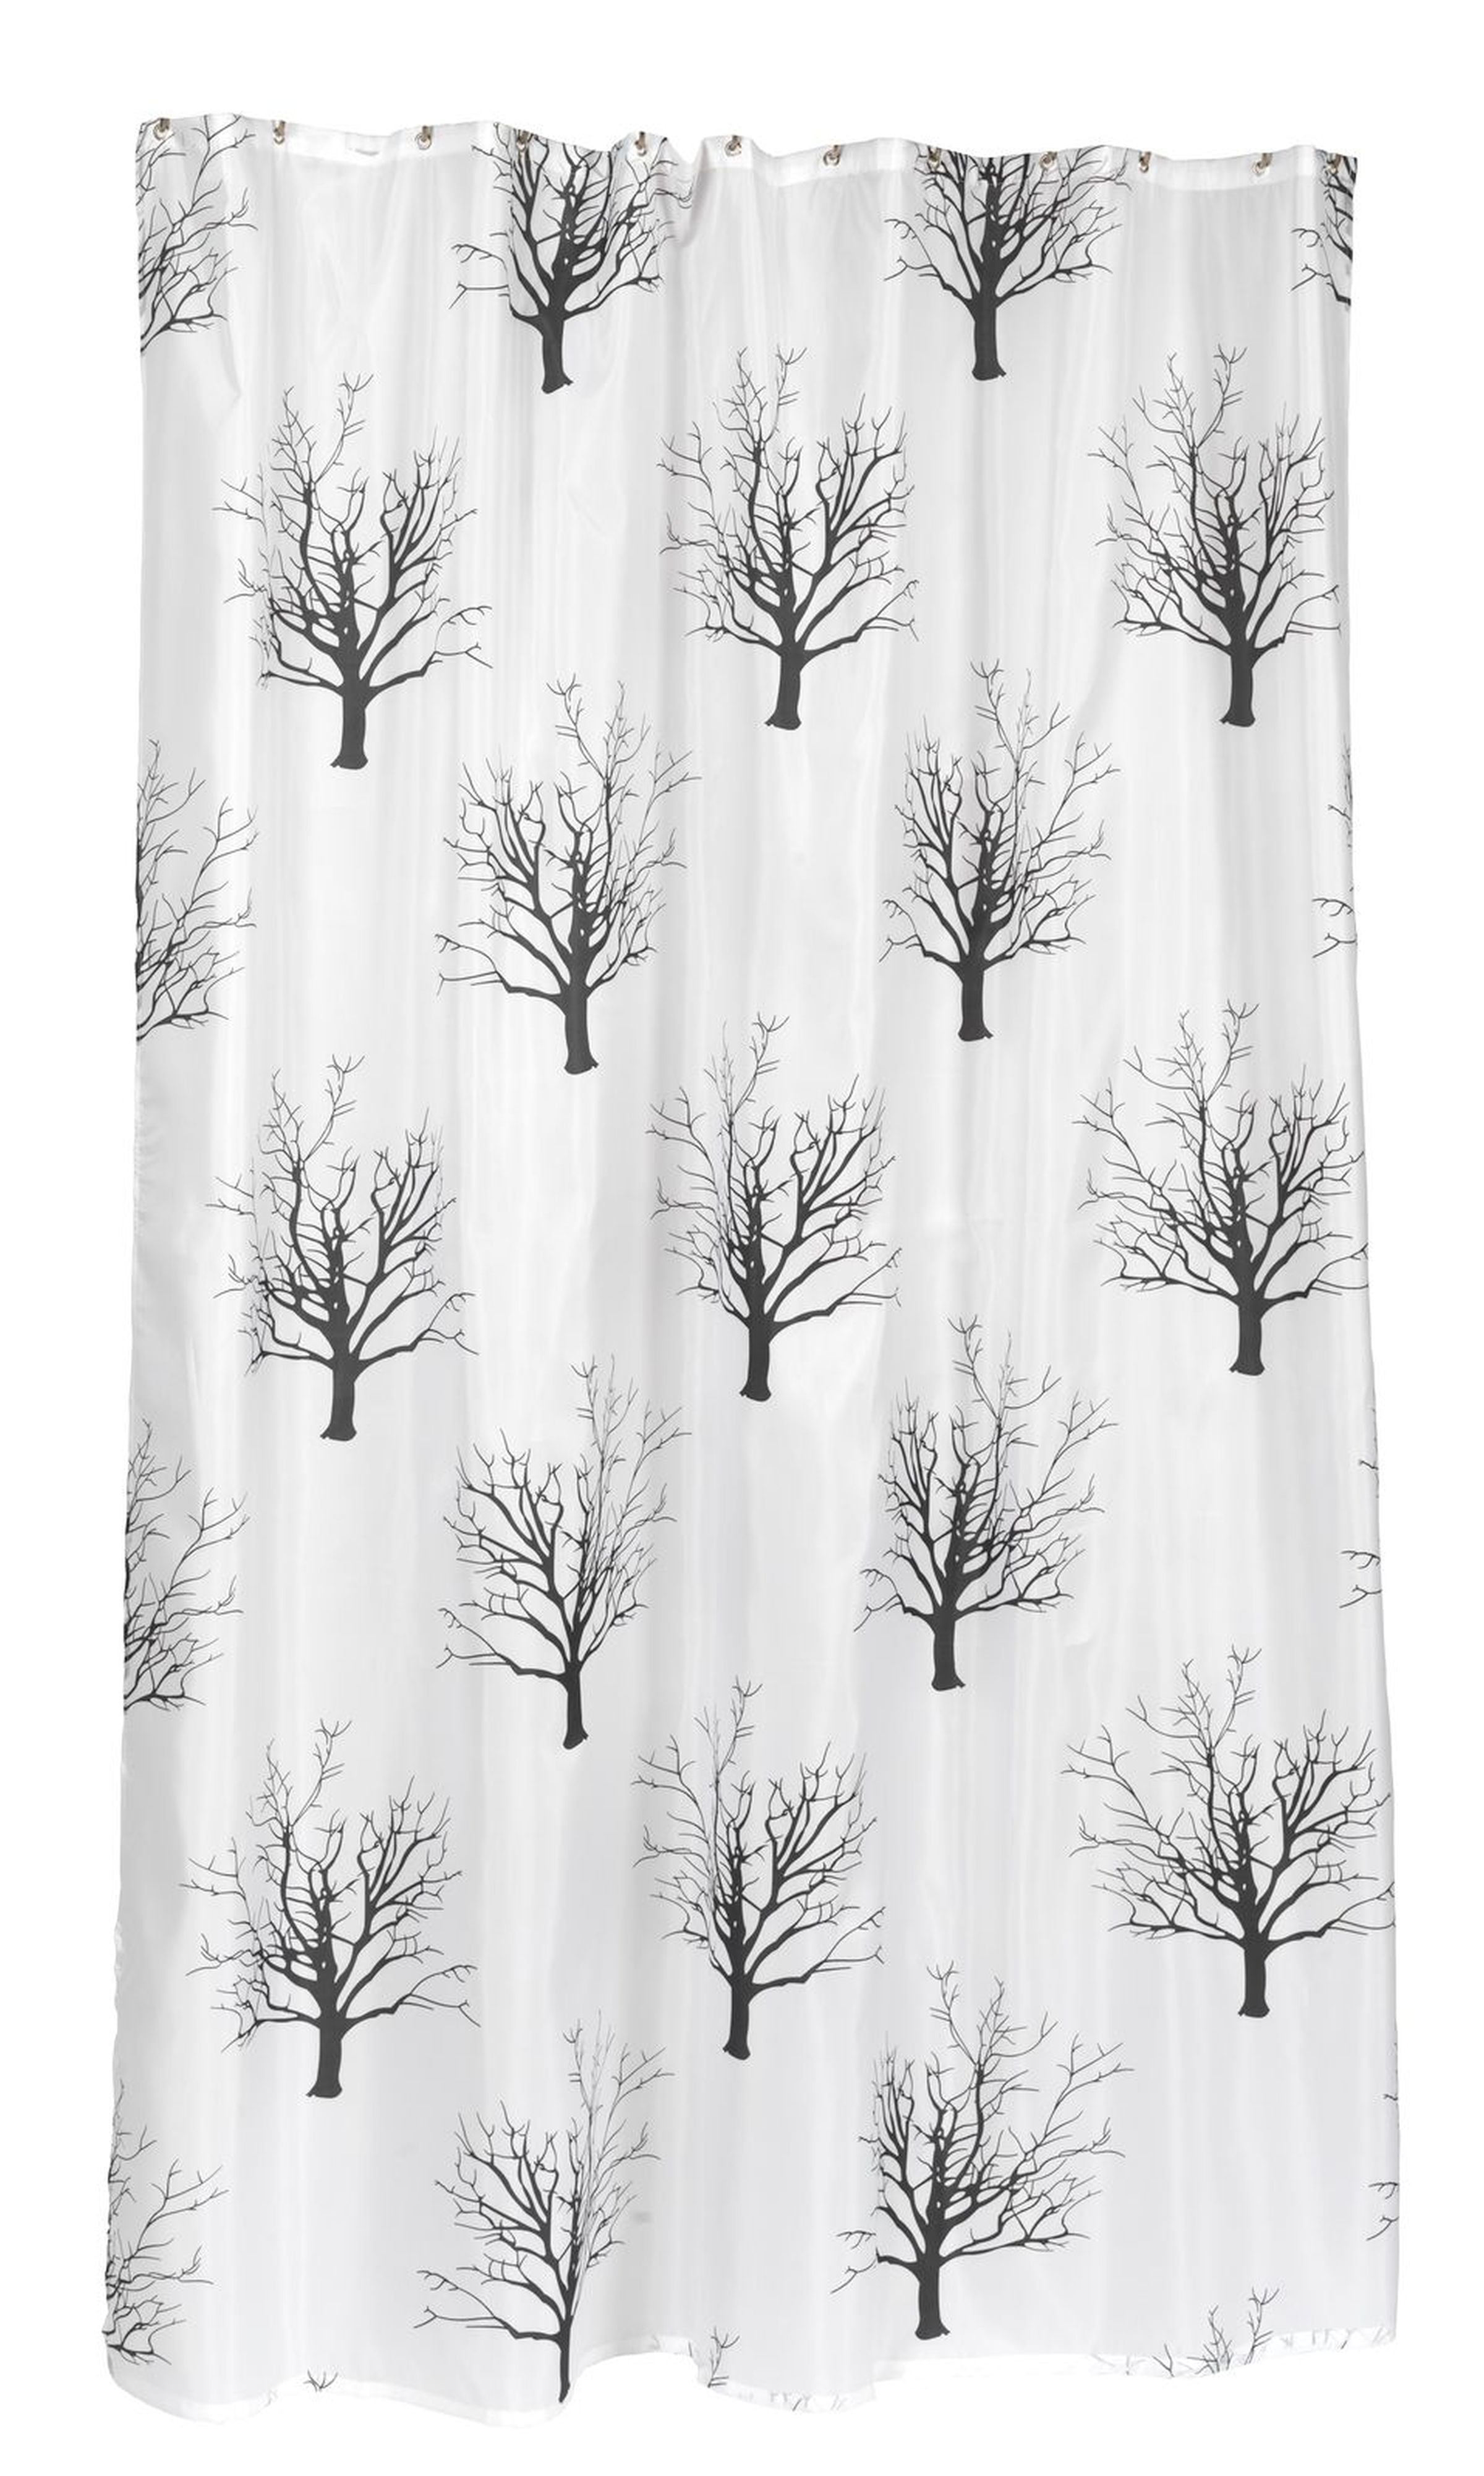 Wide Fabric Shower Curtain 108 X, Extra Wide Shower Curtain 108 X 72